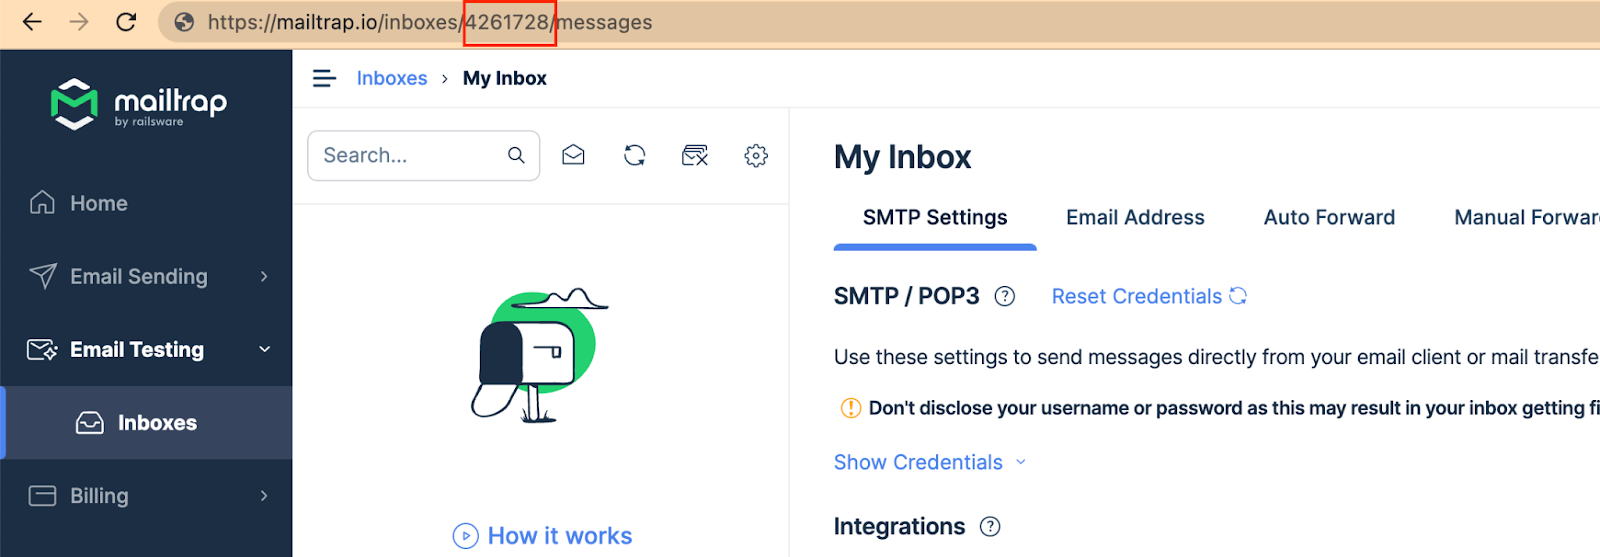 Copying the Inbox ID